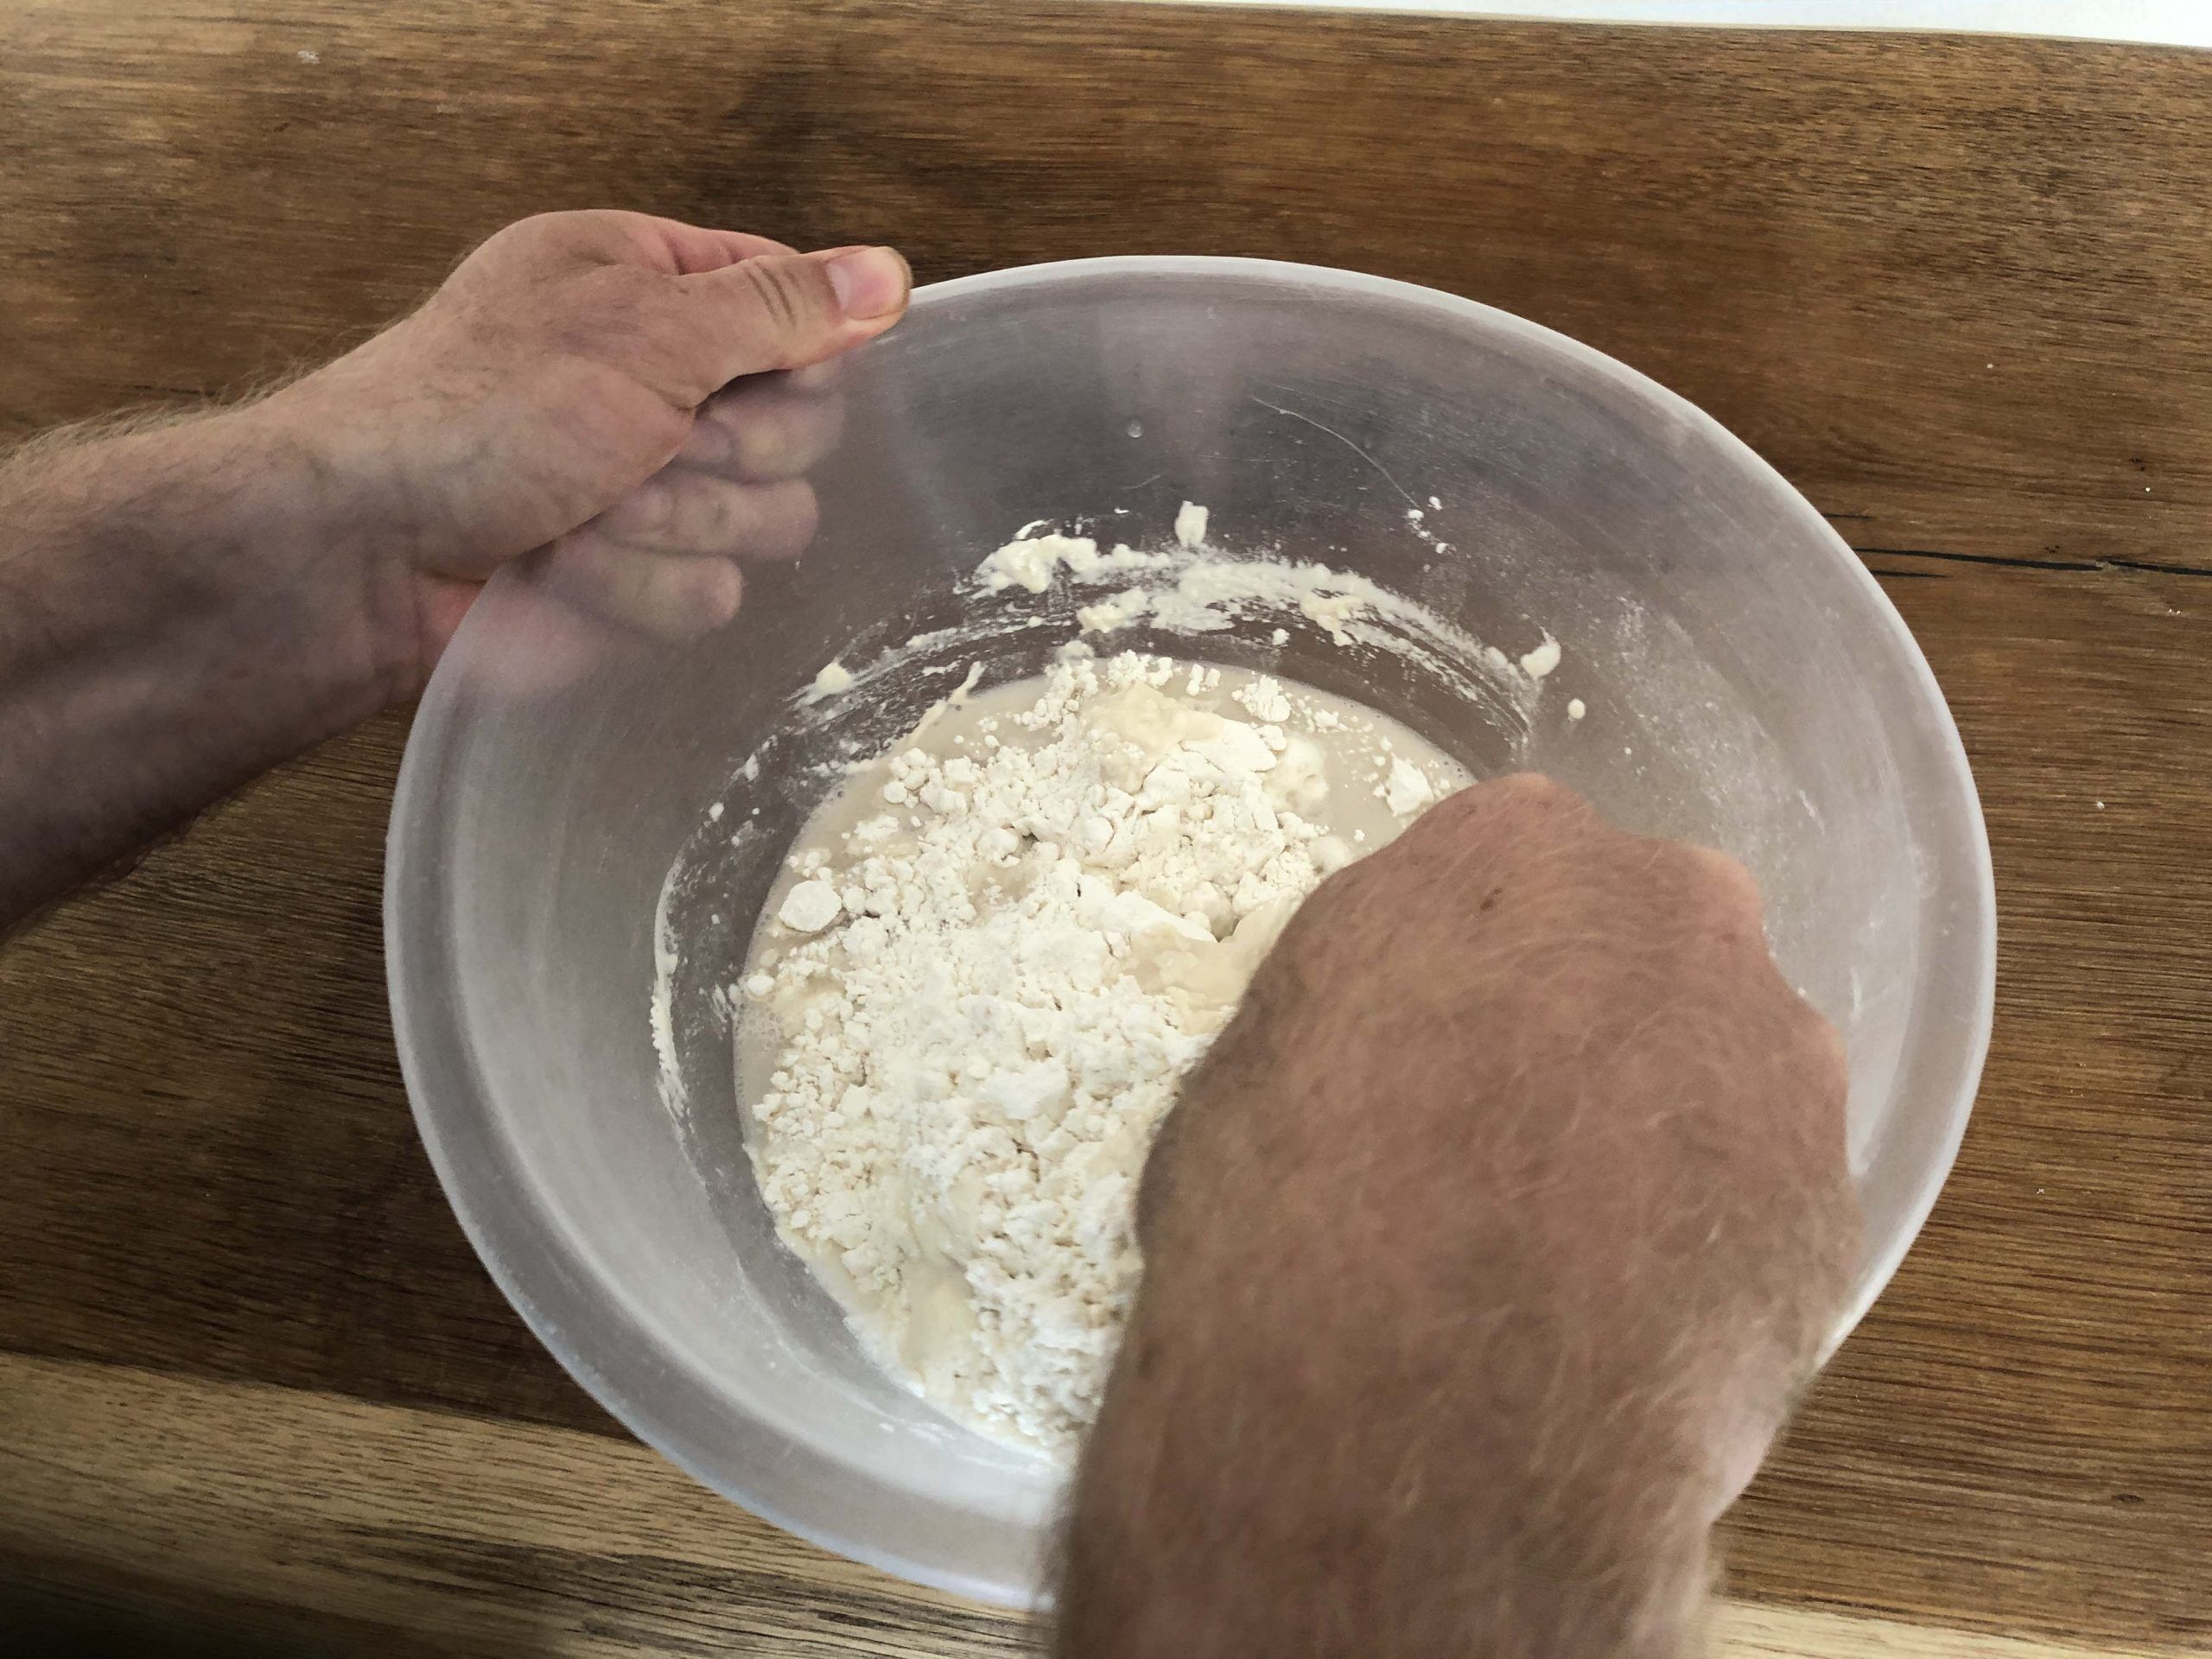 Move both hands in opposite directions with the scraper in the right hand here mixing the ingredients